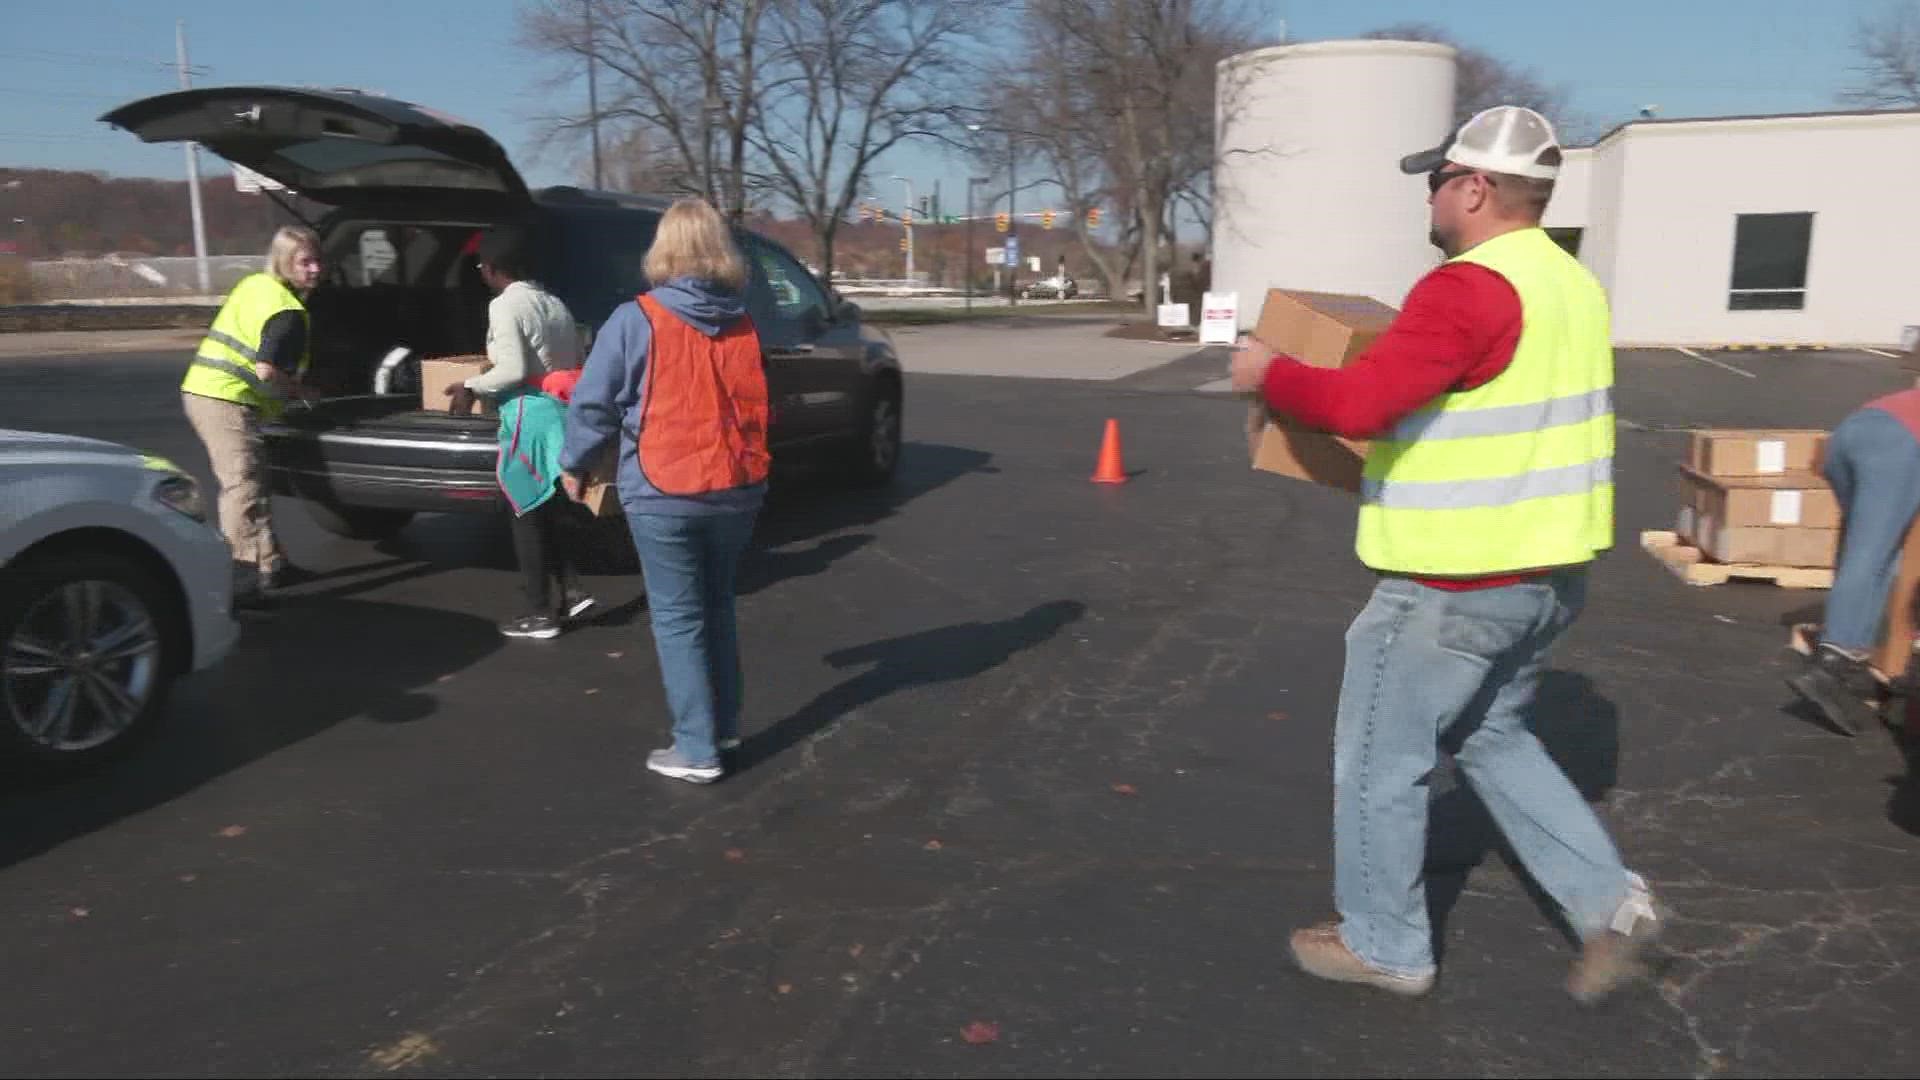 Hunger exists in every community. But employees of the Akron-Canton Regional Foodbank are doing whatever they can to get food to those who need it.